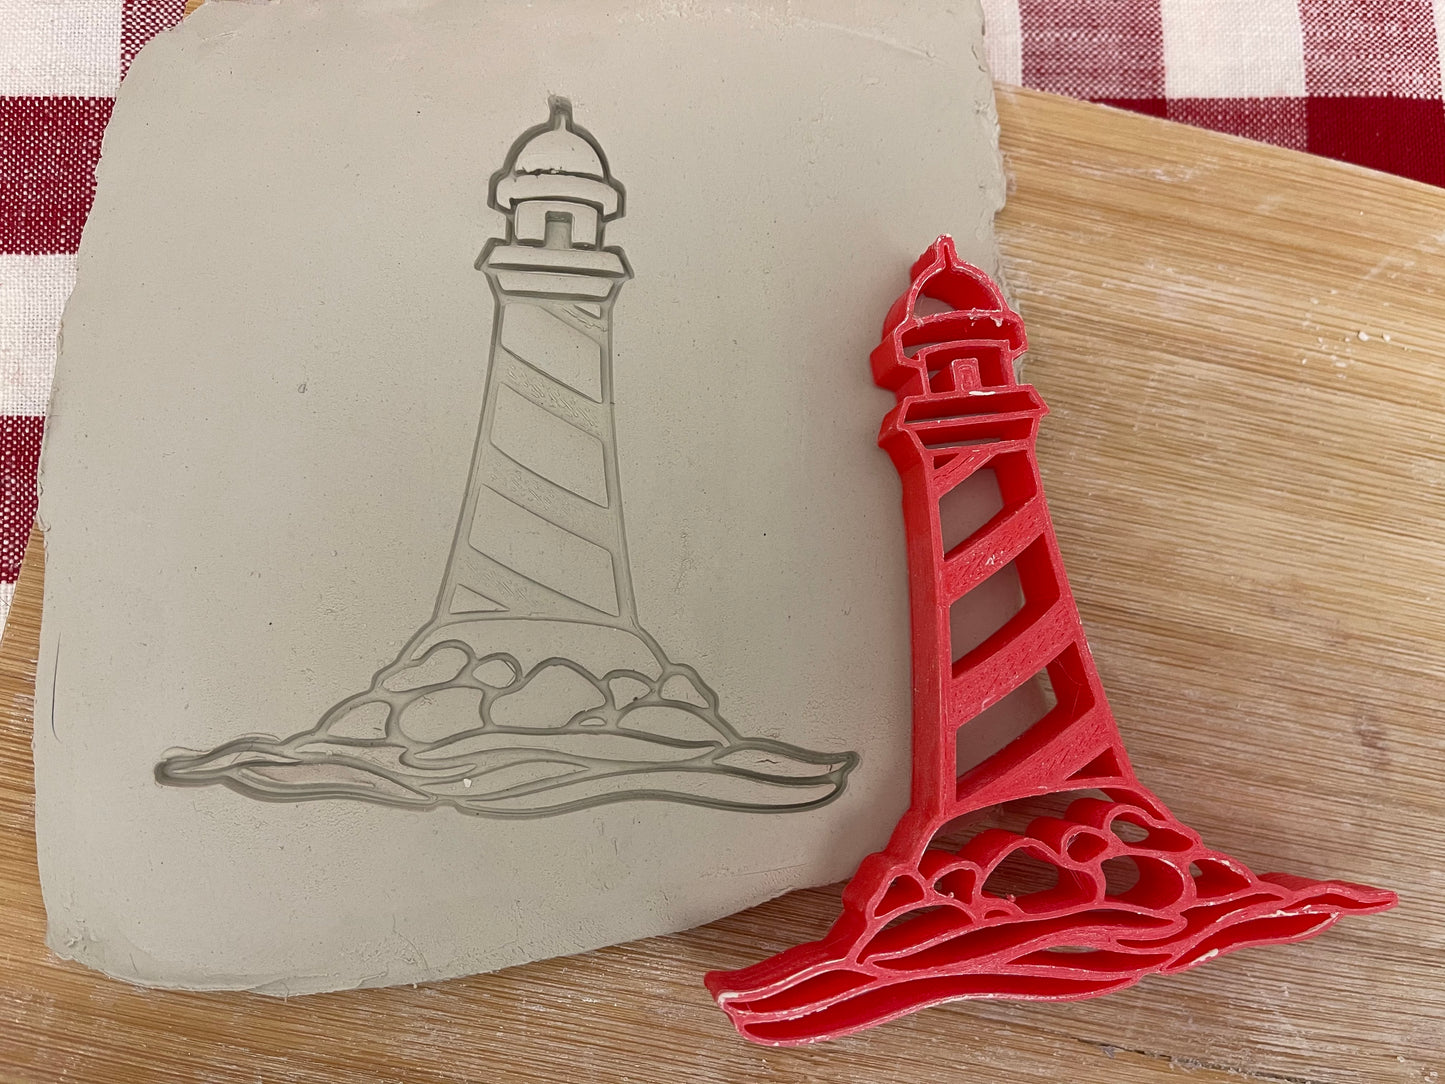 Lighthouse stamp - plastic 3D printed, multiple sizes